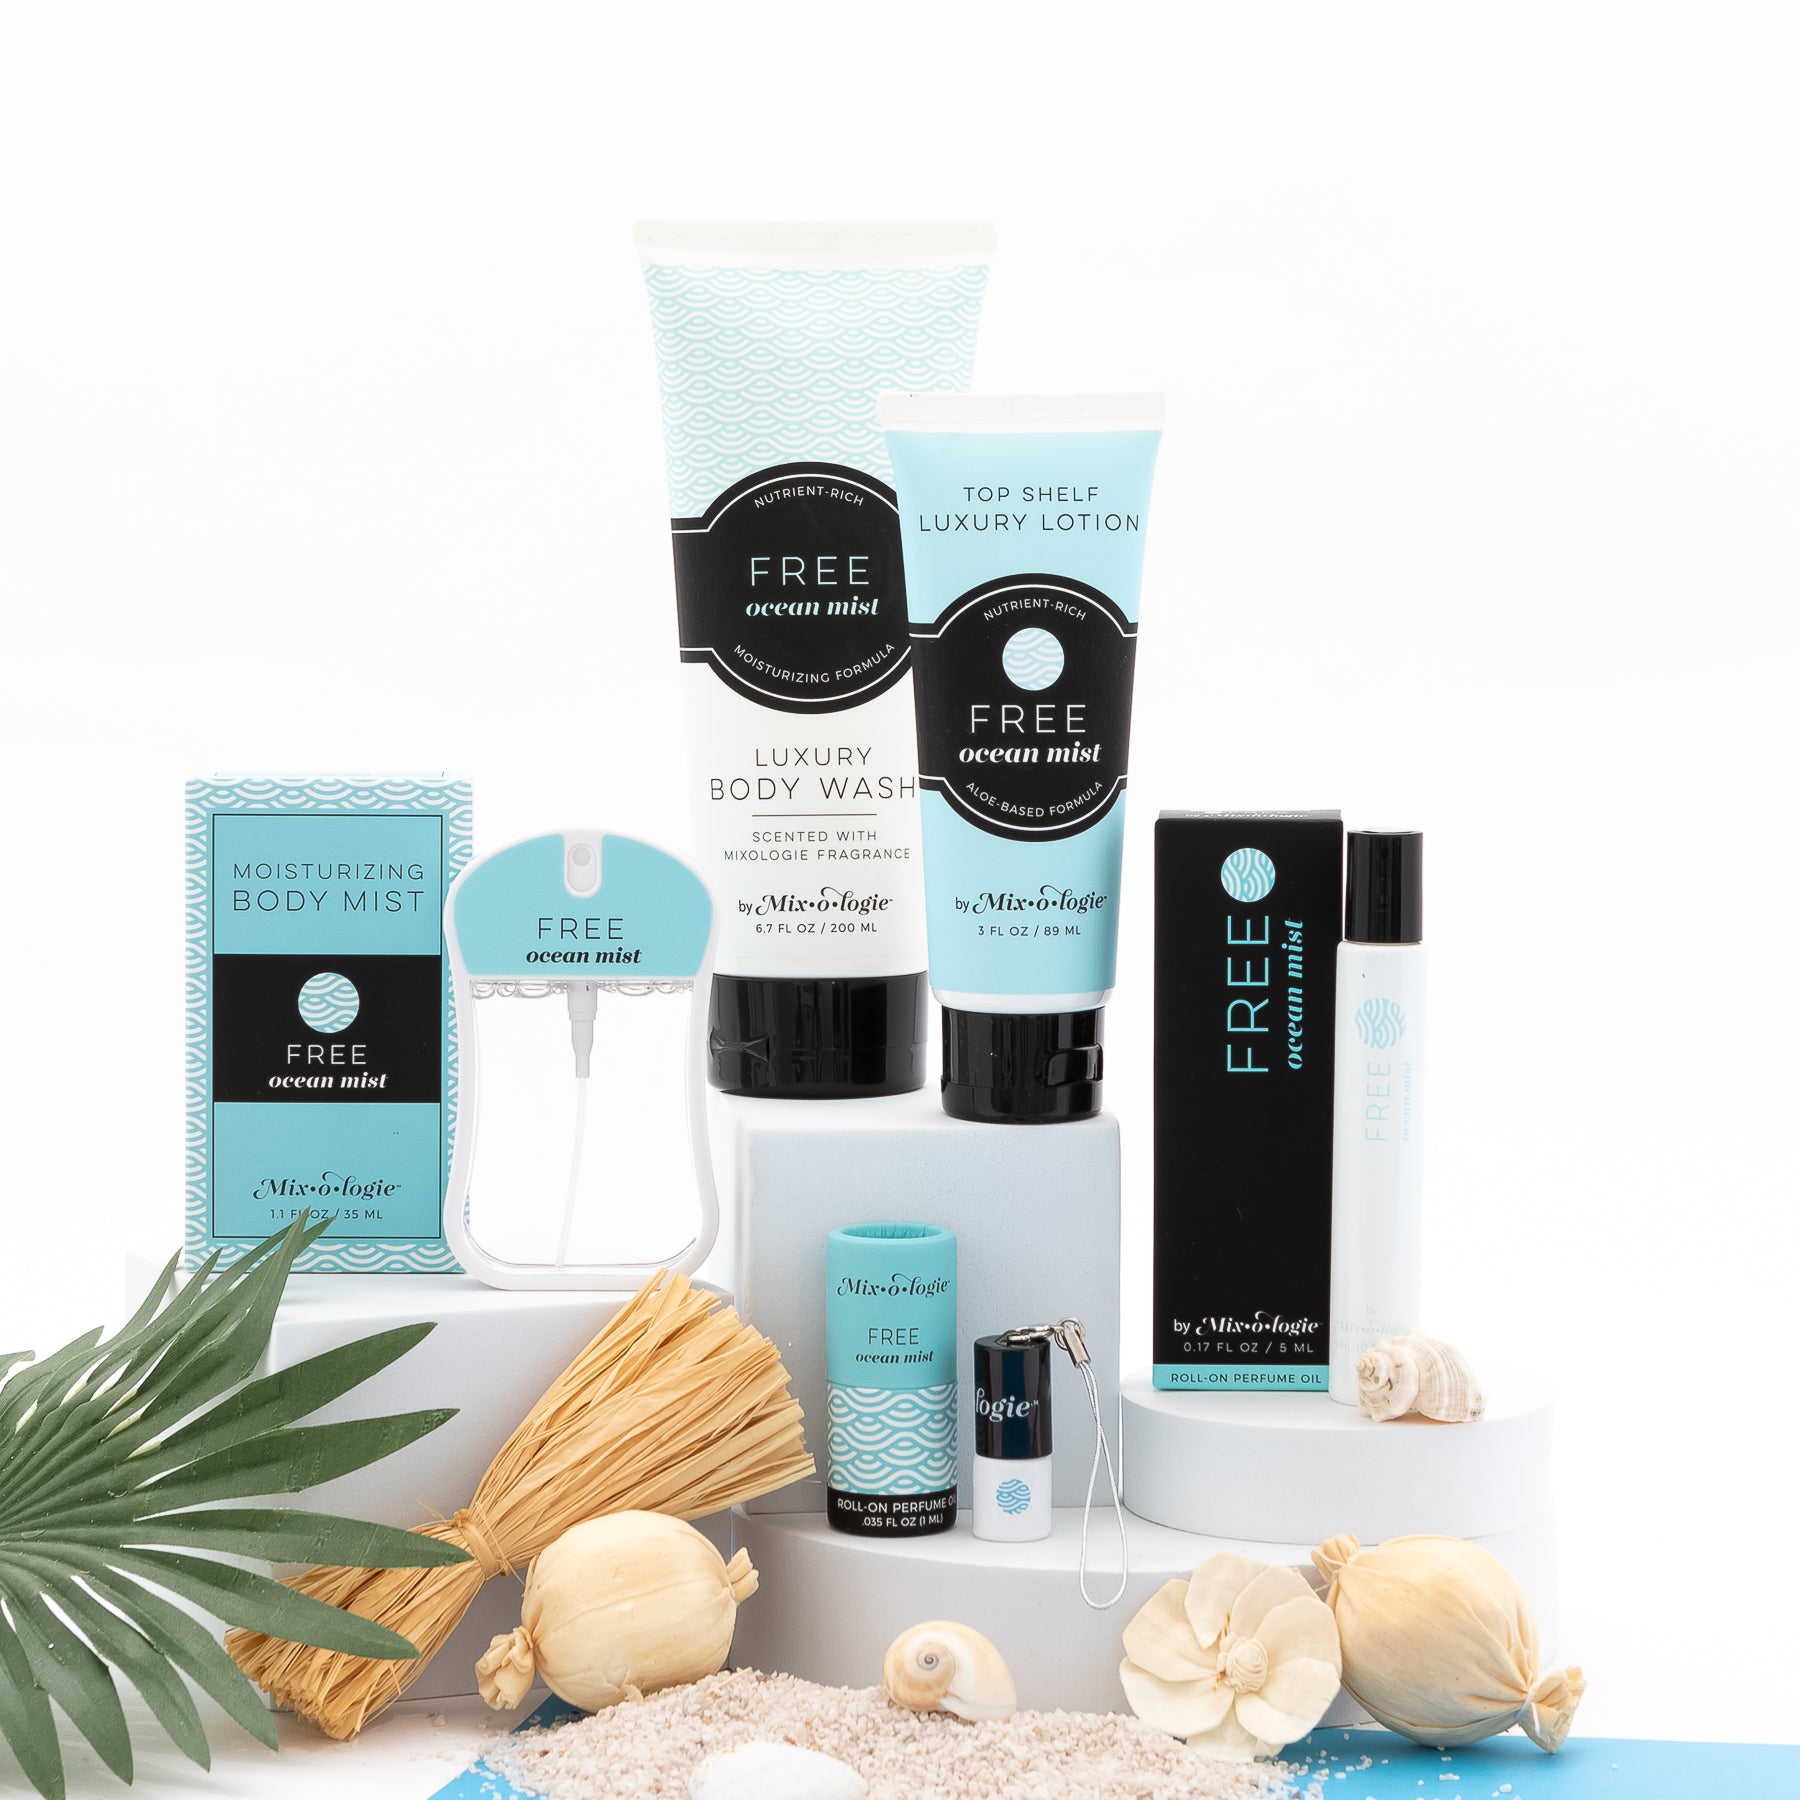 Free (ocean mist) scented products all together with beach vibes seashells and palm